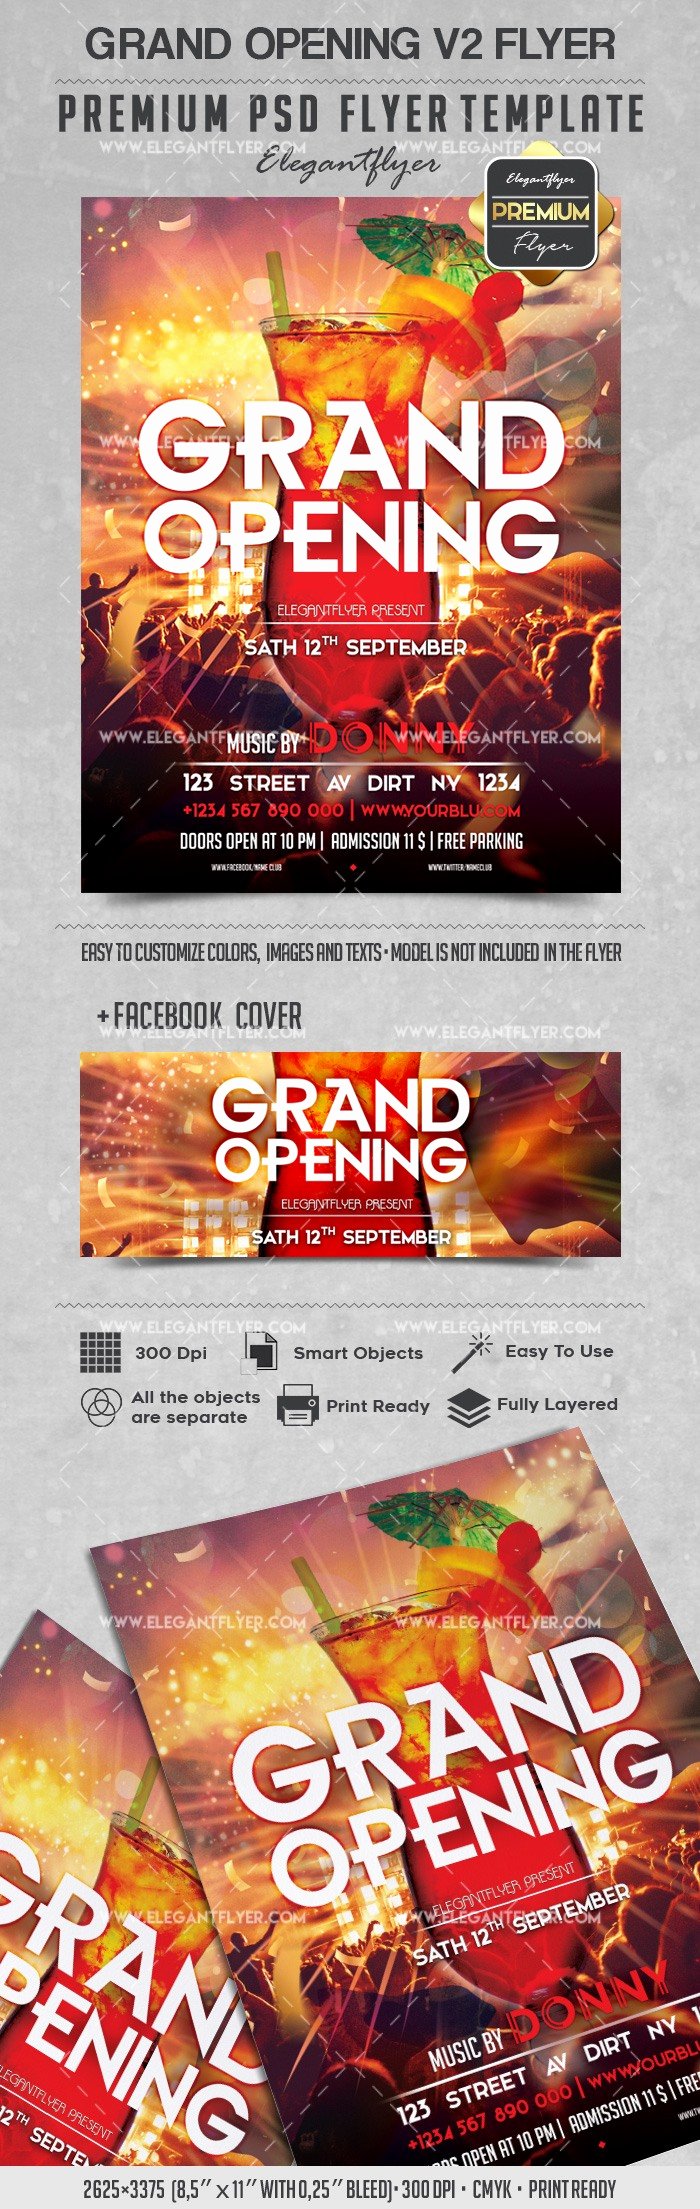 Grand Opening Flyer Template Luxury Grand Opening V2 – Flyer Psd Template – by Elegantflyer